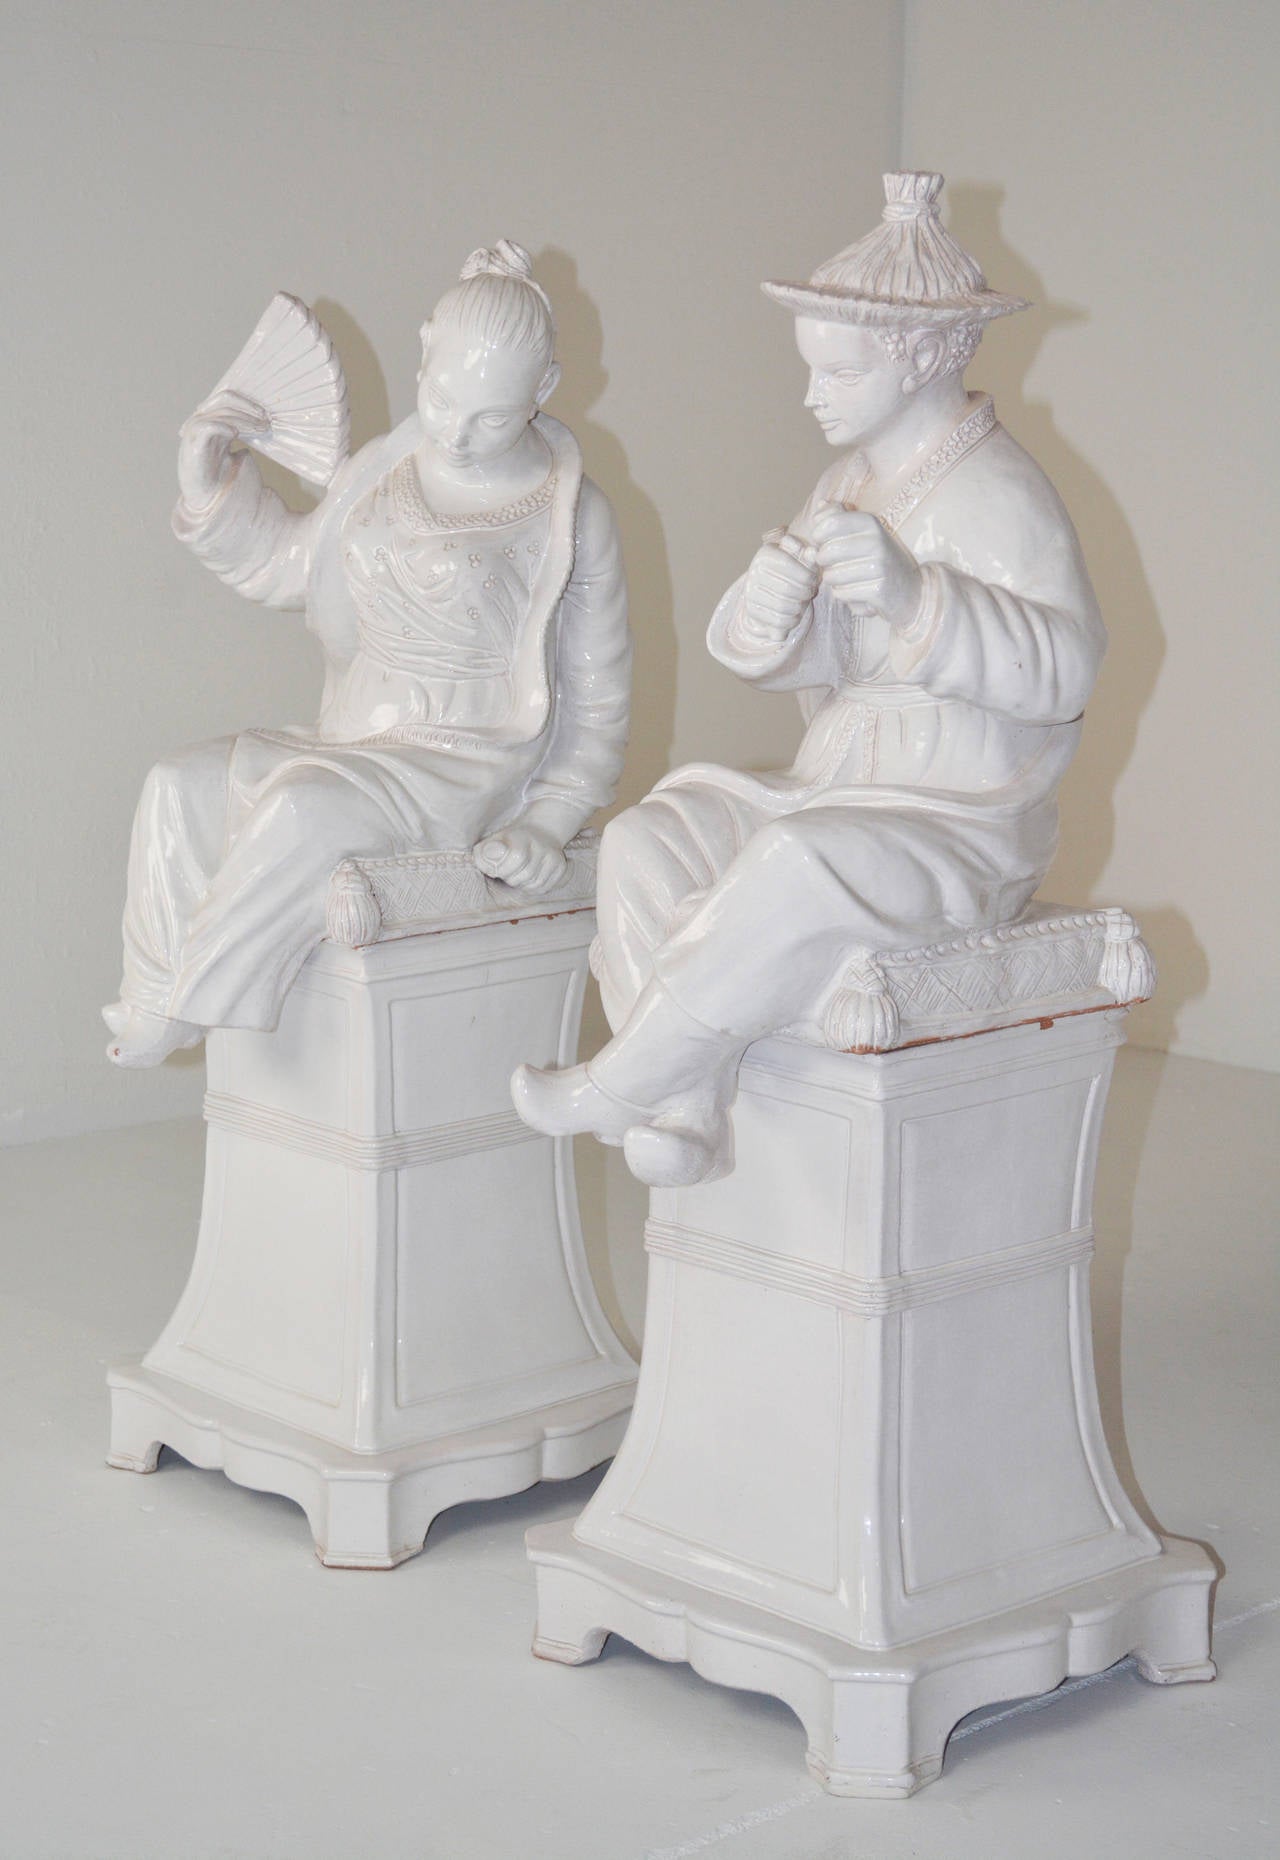 Chinoiserie Pair of Large Italian Faience Glazed Chinese Figures on Pedestals